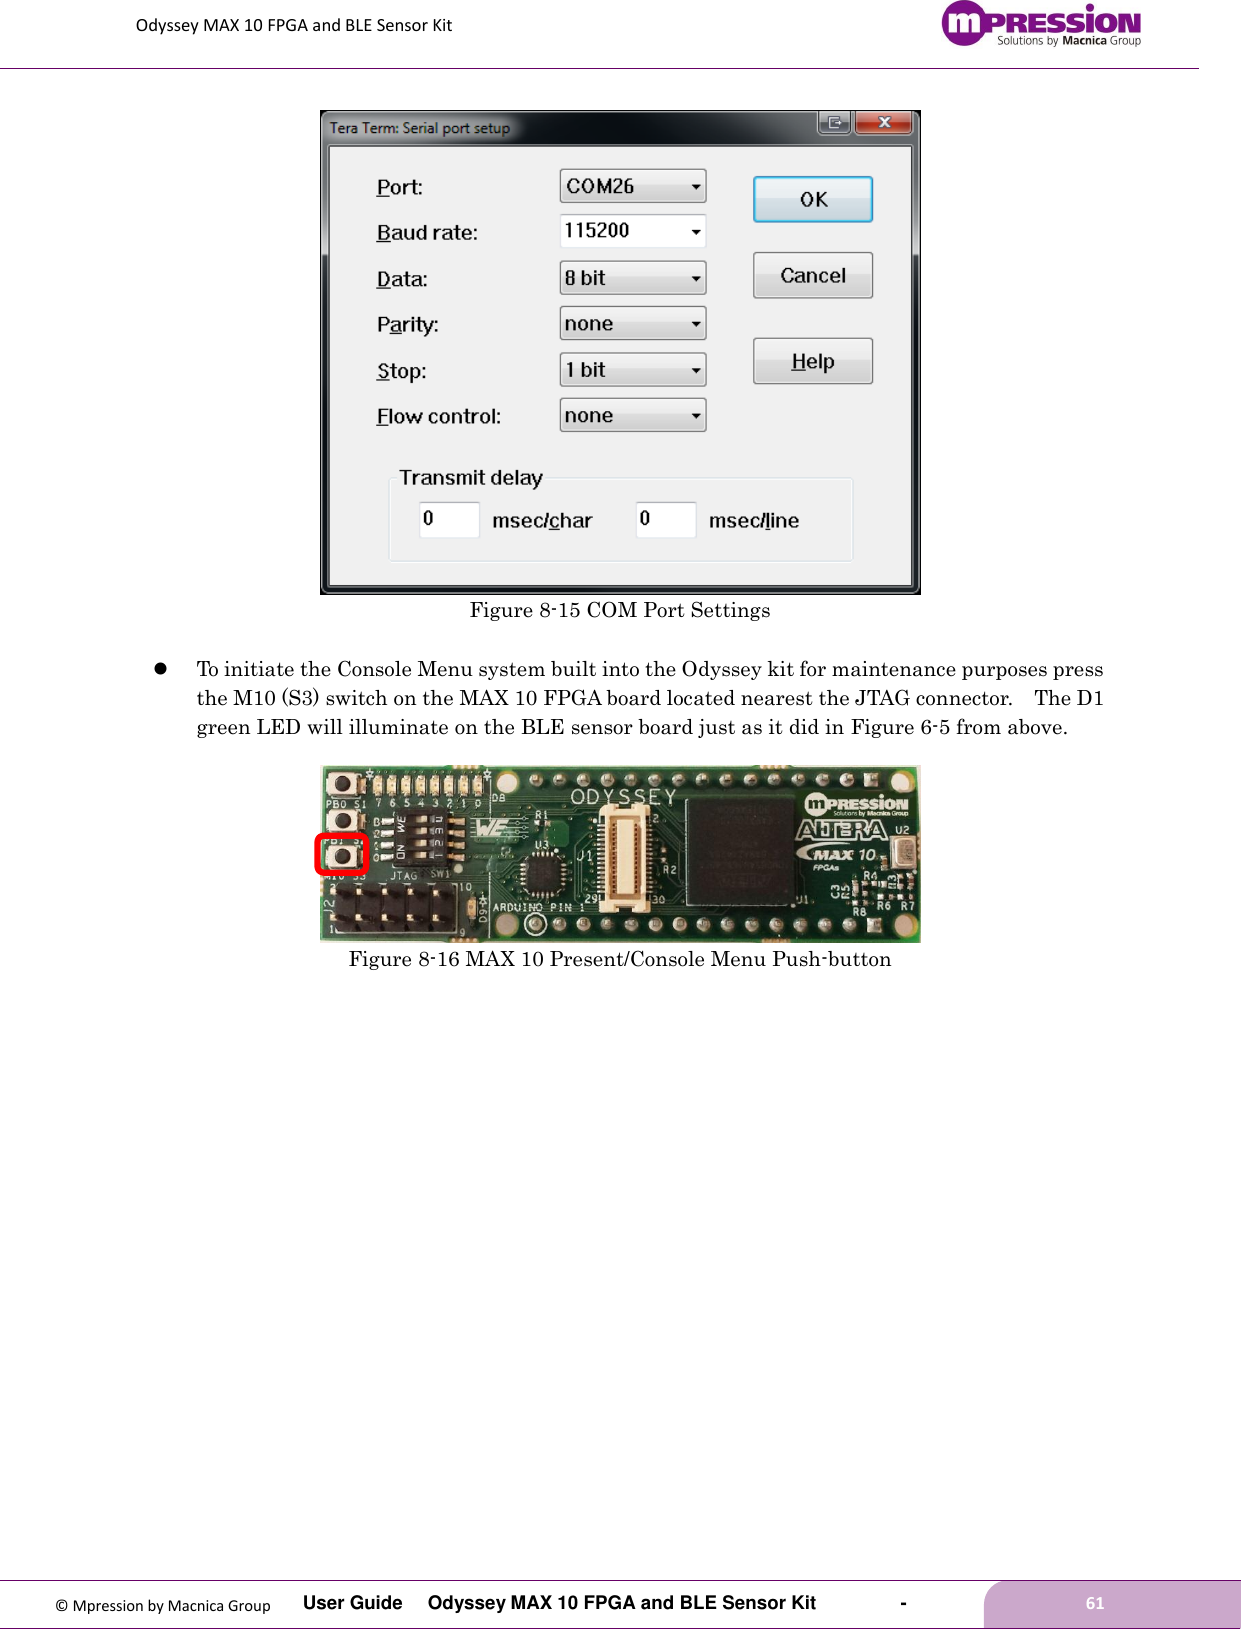 Odyssey MAX 10 FPGA and BLE Sensor Kit         User Guide  Odyssey MAX 10 FPGA and BLE Sensor Kit        -        61  © Mpression by Macnica Group    Figure 8-15 COM Port Settings   To initiate the Console Menu system built into the Odyssey kit for maintenance purposes press the M10 (S3) switch on the MAX 10 FPGA board located nearest the JTAG connector.    The D1 green LED will illuminate on the BLE sensor board just as it did in Figure 6-5 from above.   Figure 8-16 MAX 10 Present/Console Menu Push-button  